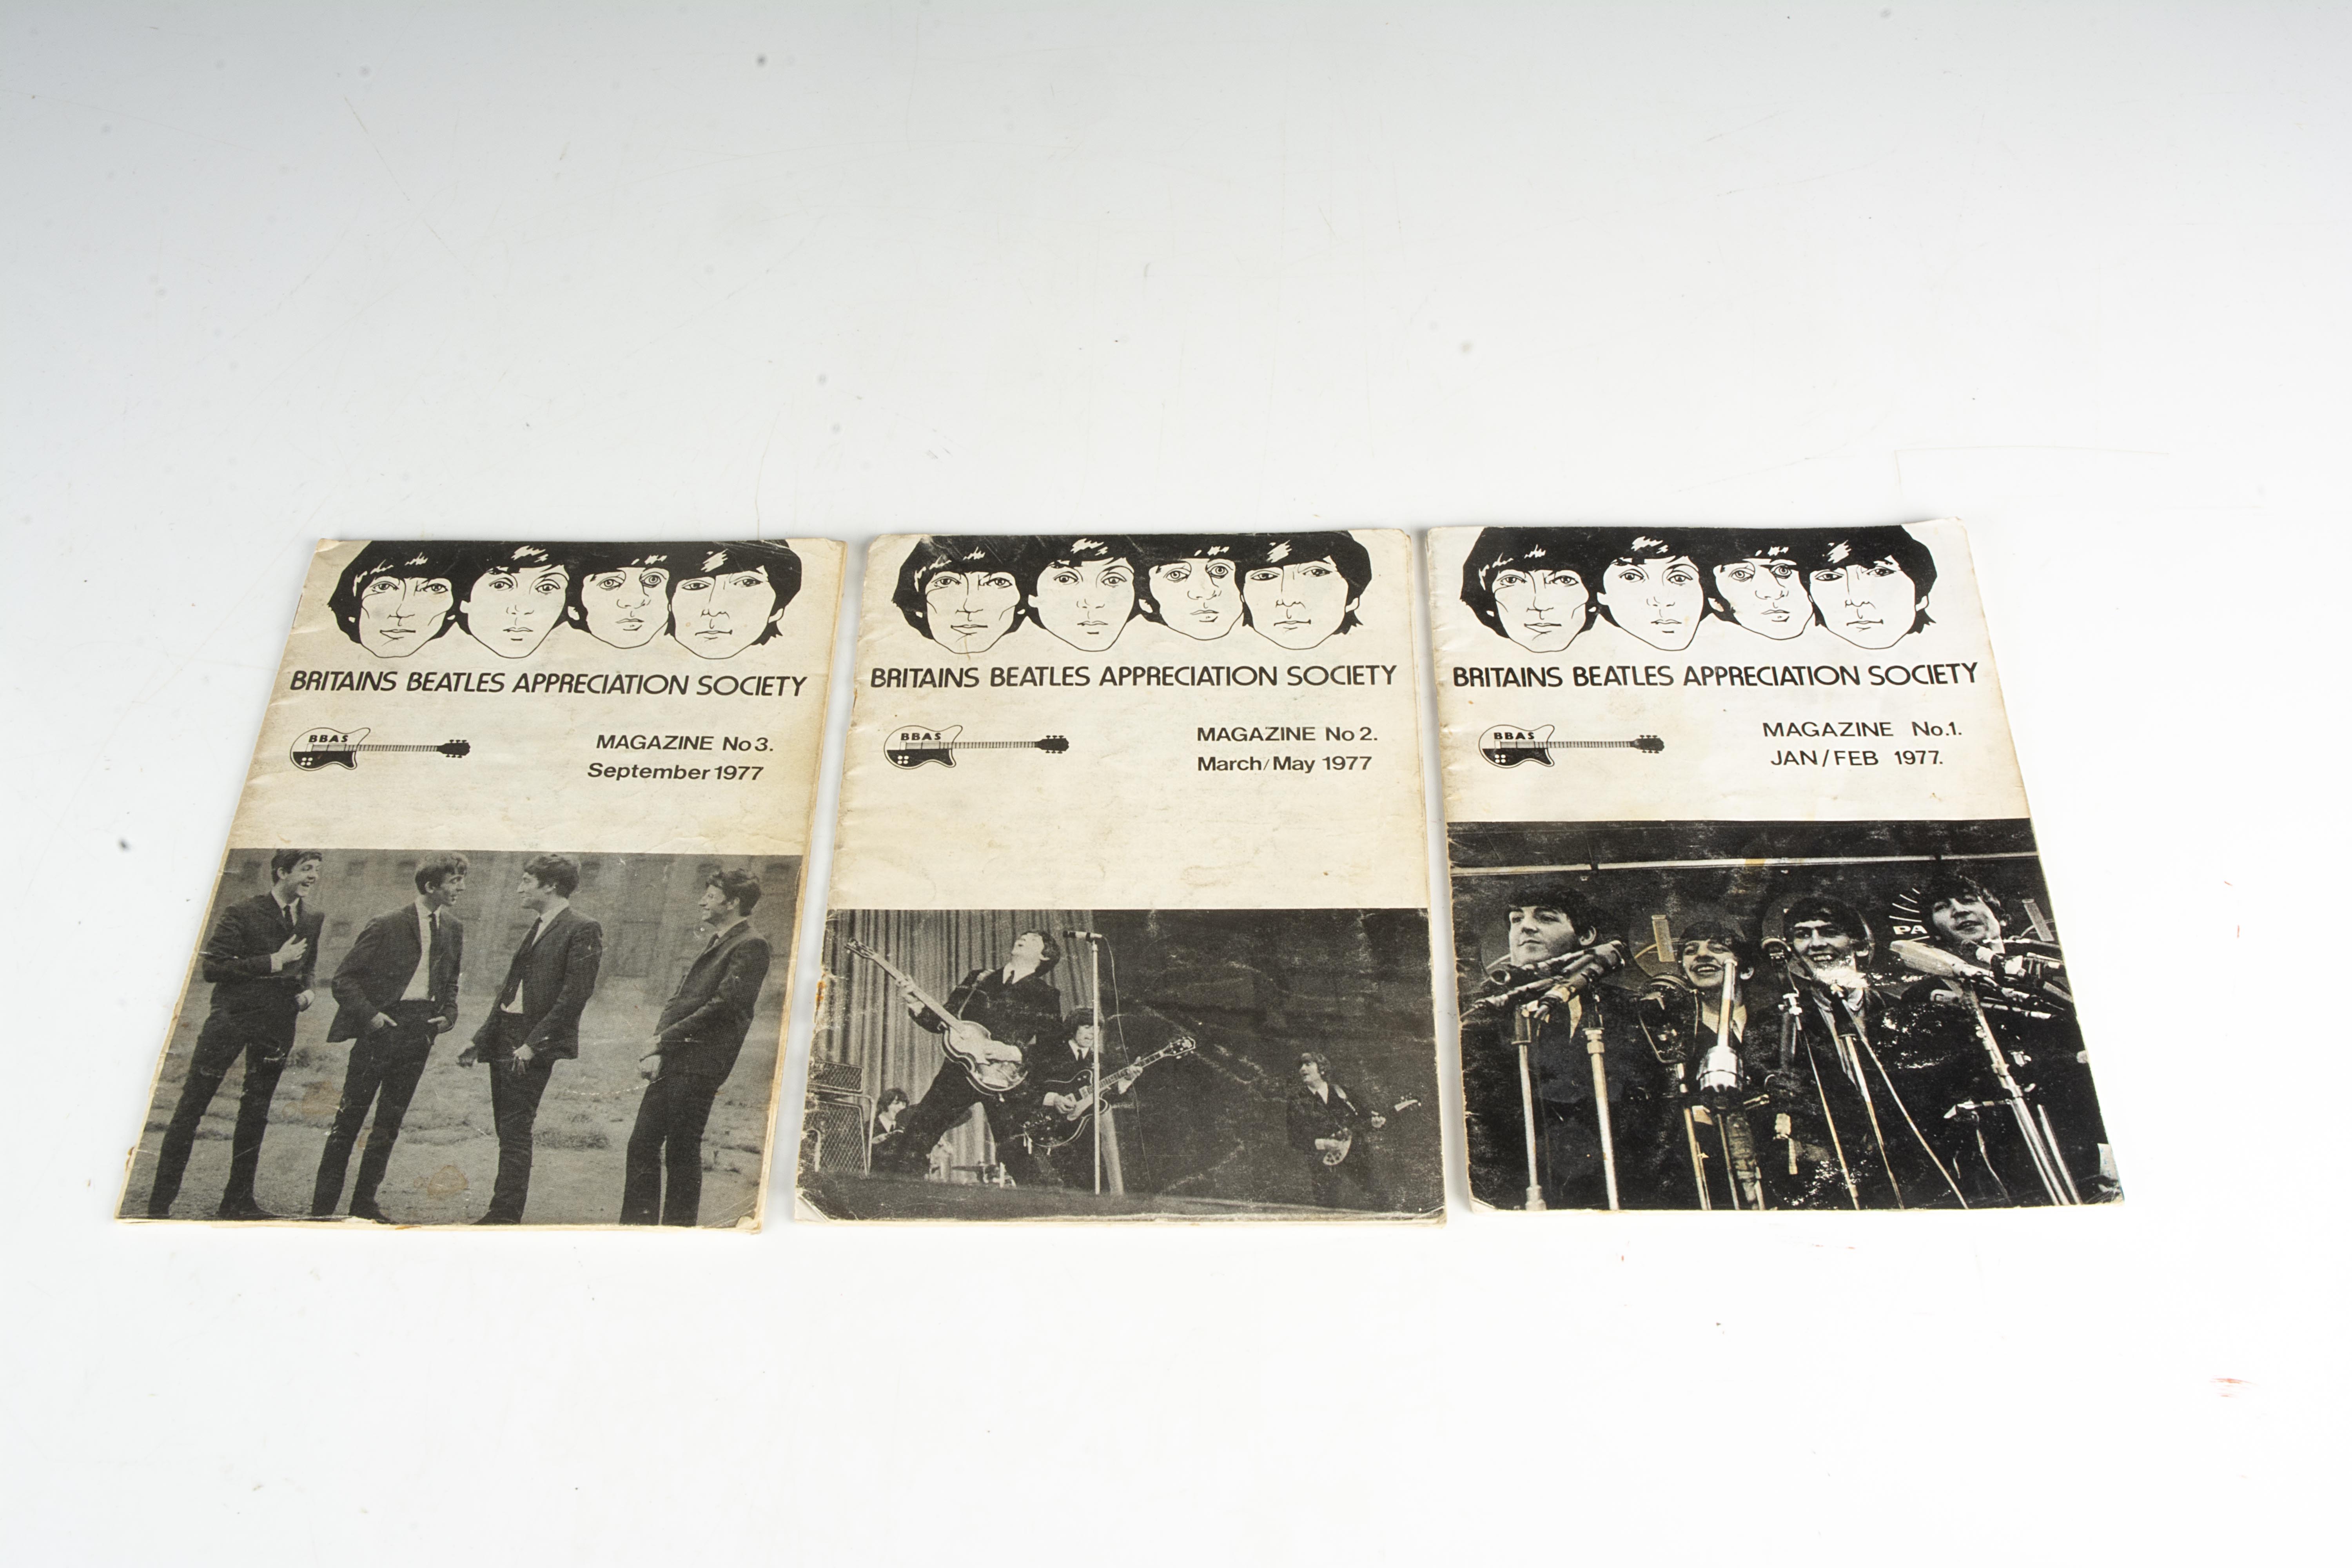 Beatles Appreciation Society Magazines, the first three copies of the Britains Beatles